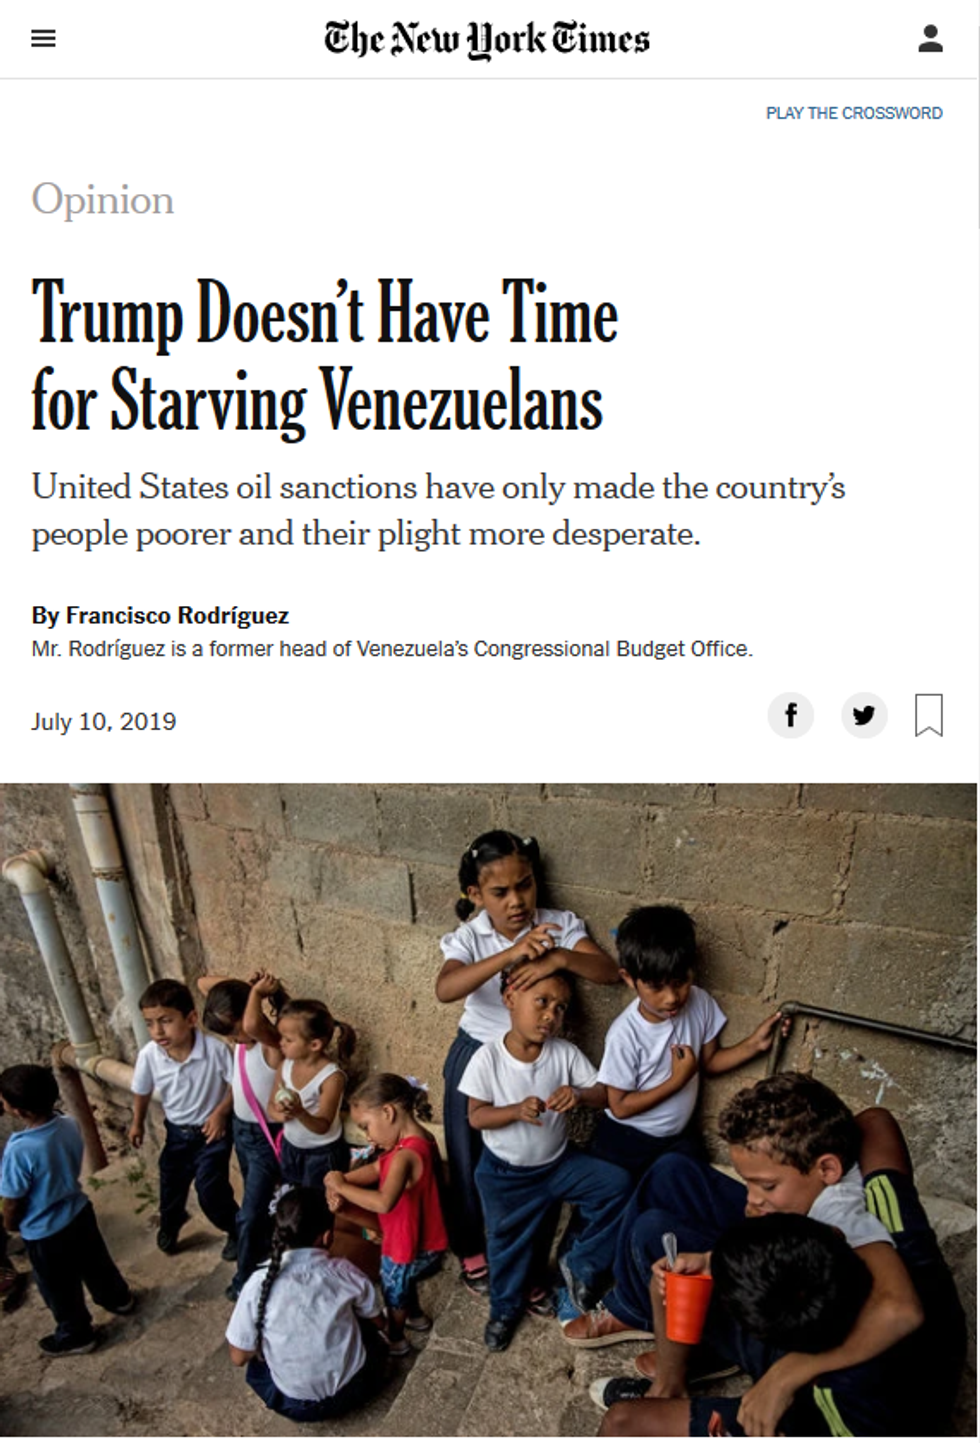 NYT: Trump Doesn't Have Time for Starving Venezuelans